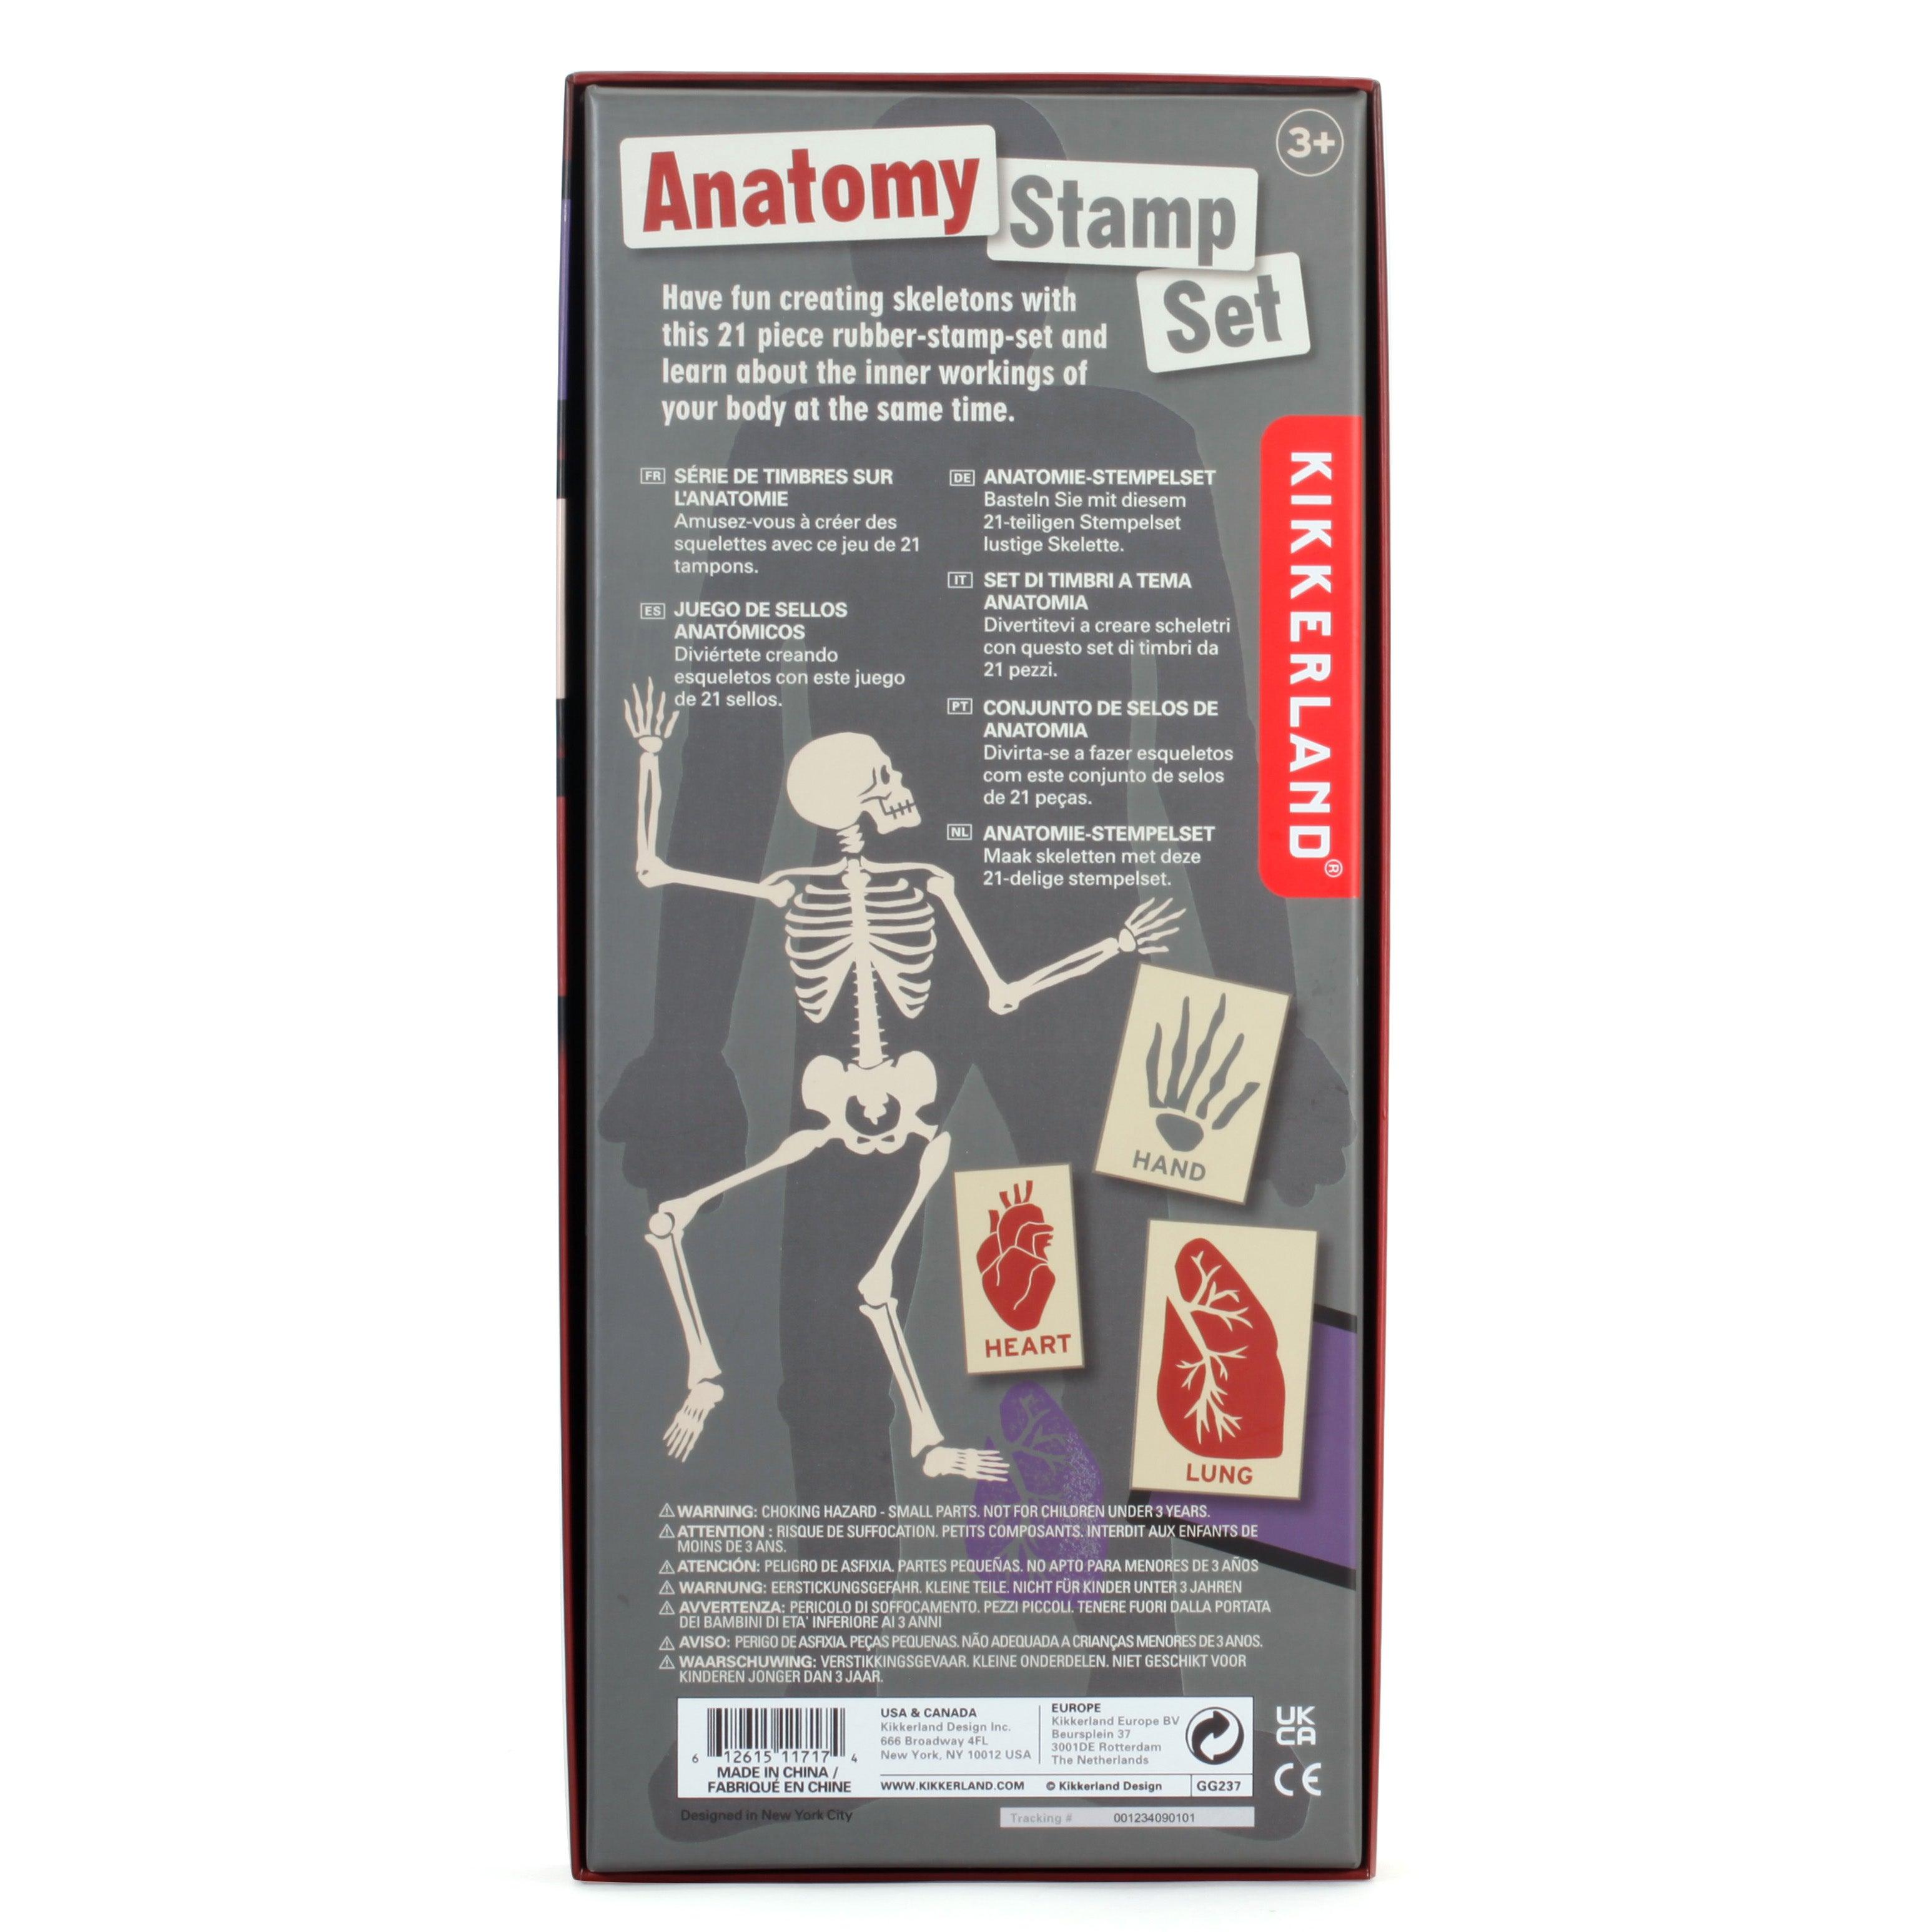 Anatomy Stamp Set - Why and Whale